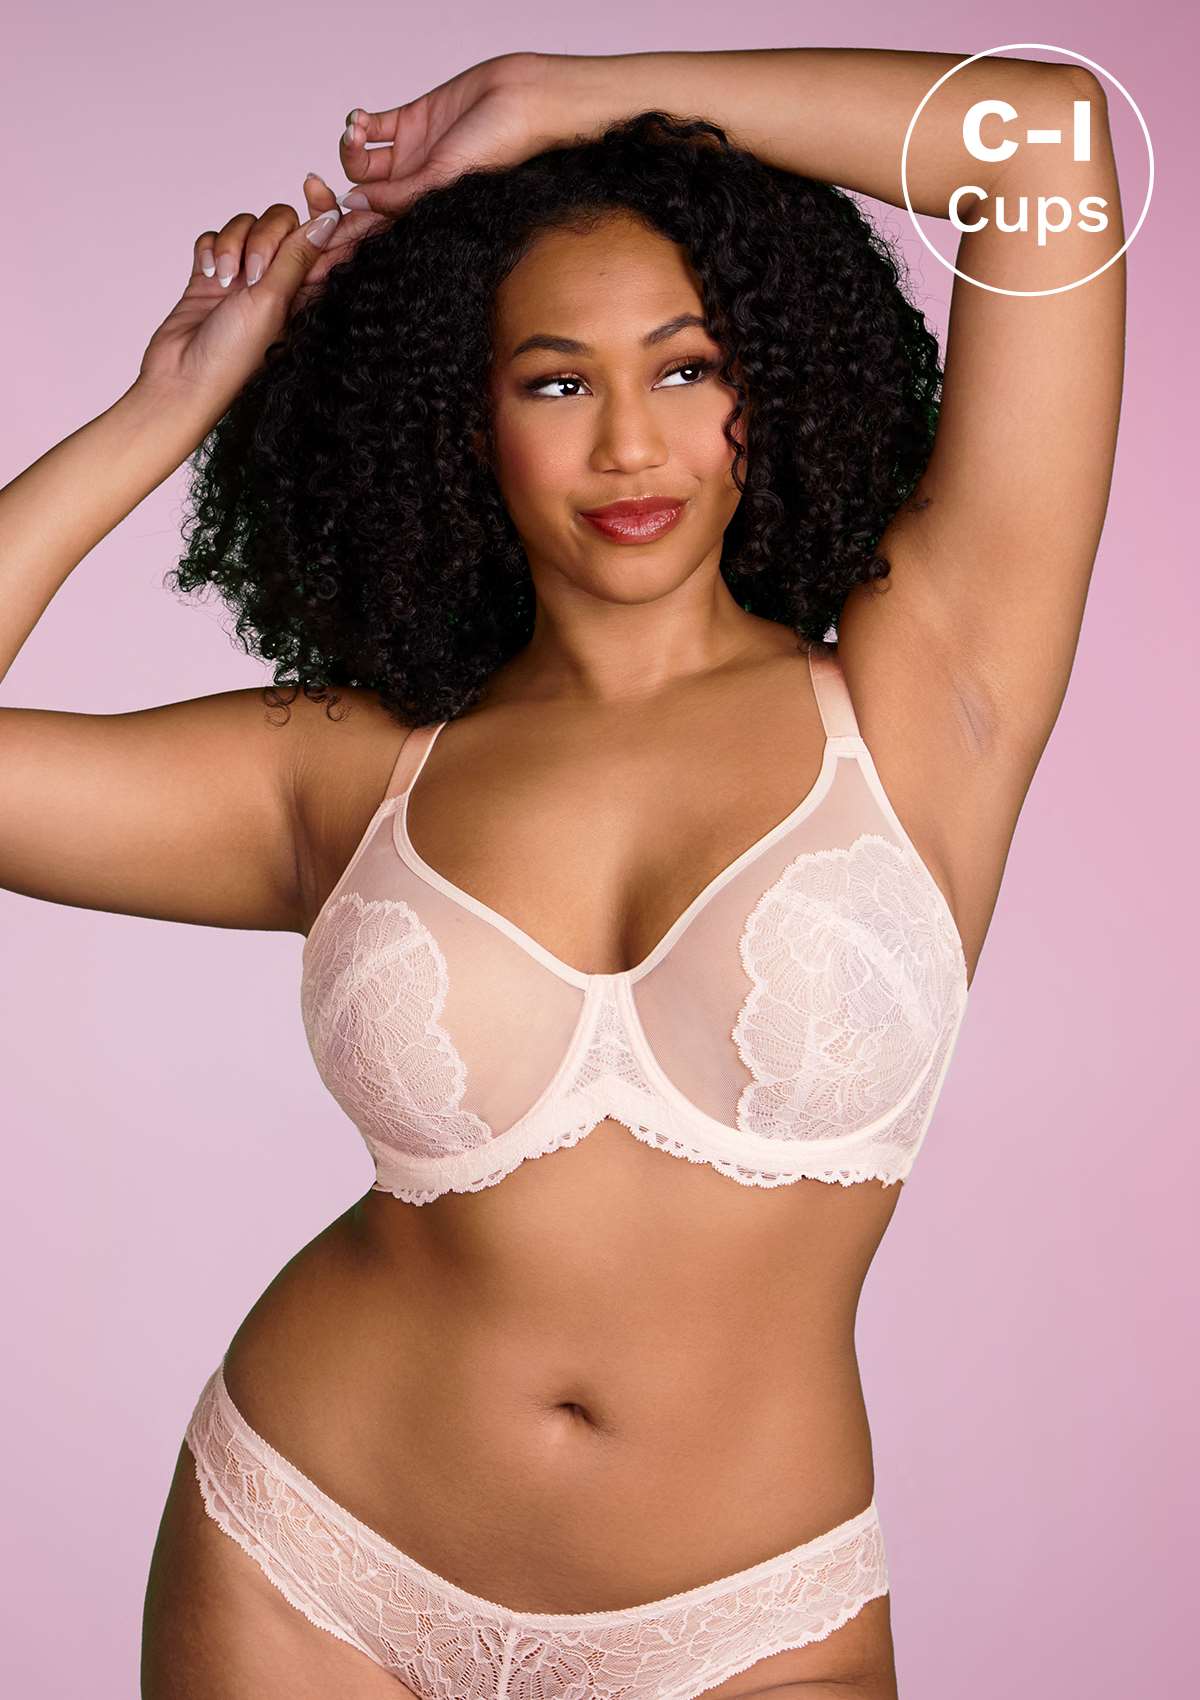 HSIA Blossom Sheer Lace Bra: Comfortable Underwire Bra For Big Busts - White / 40 / I